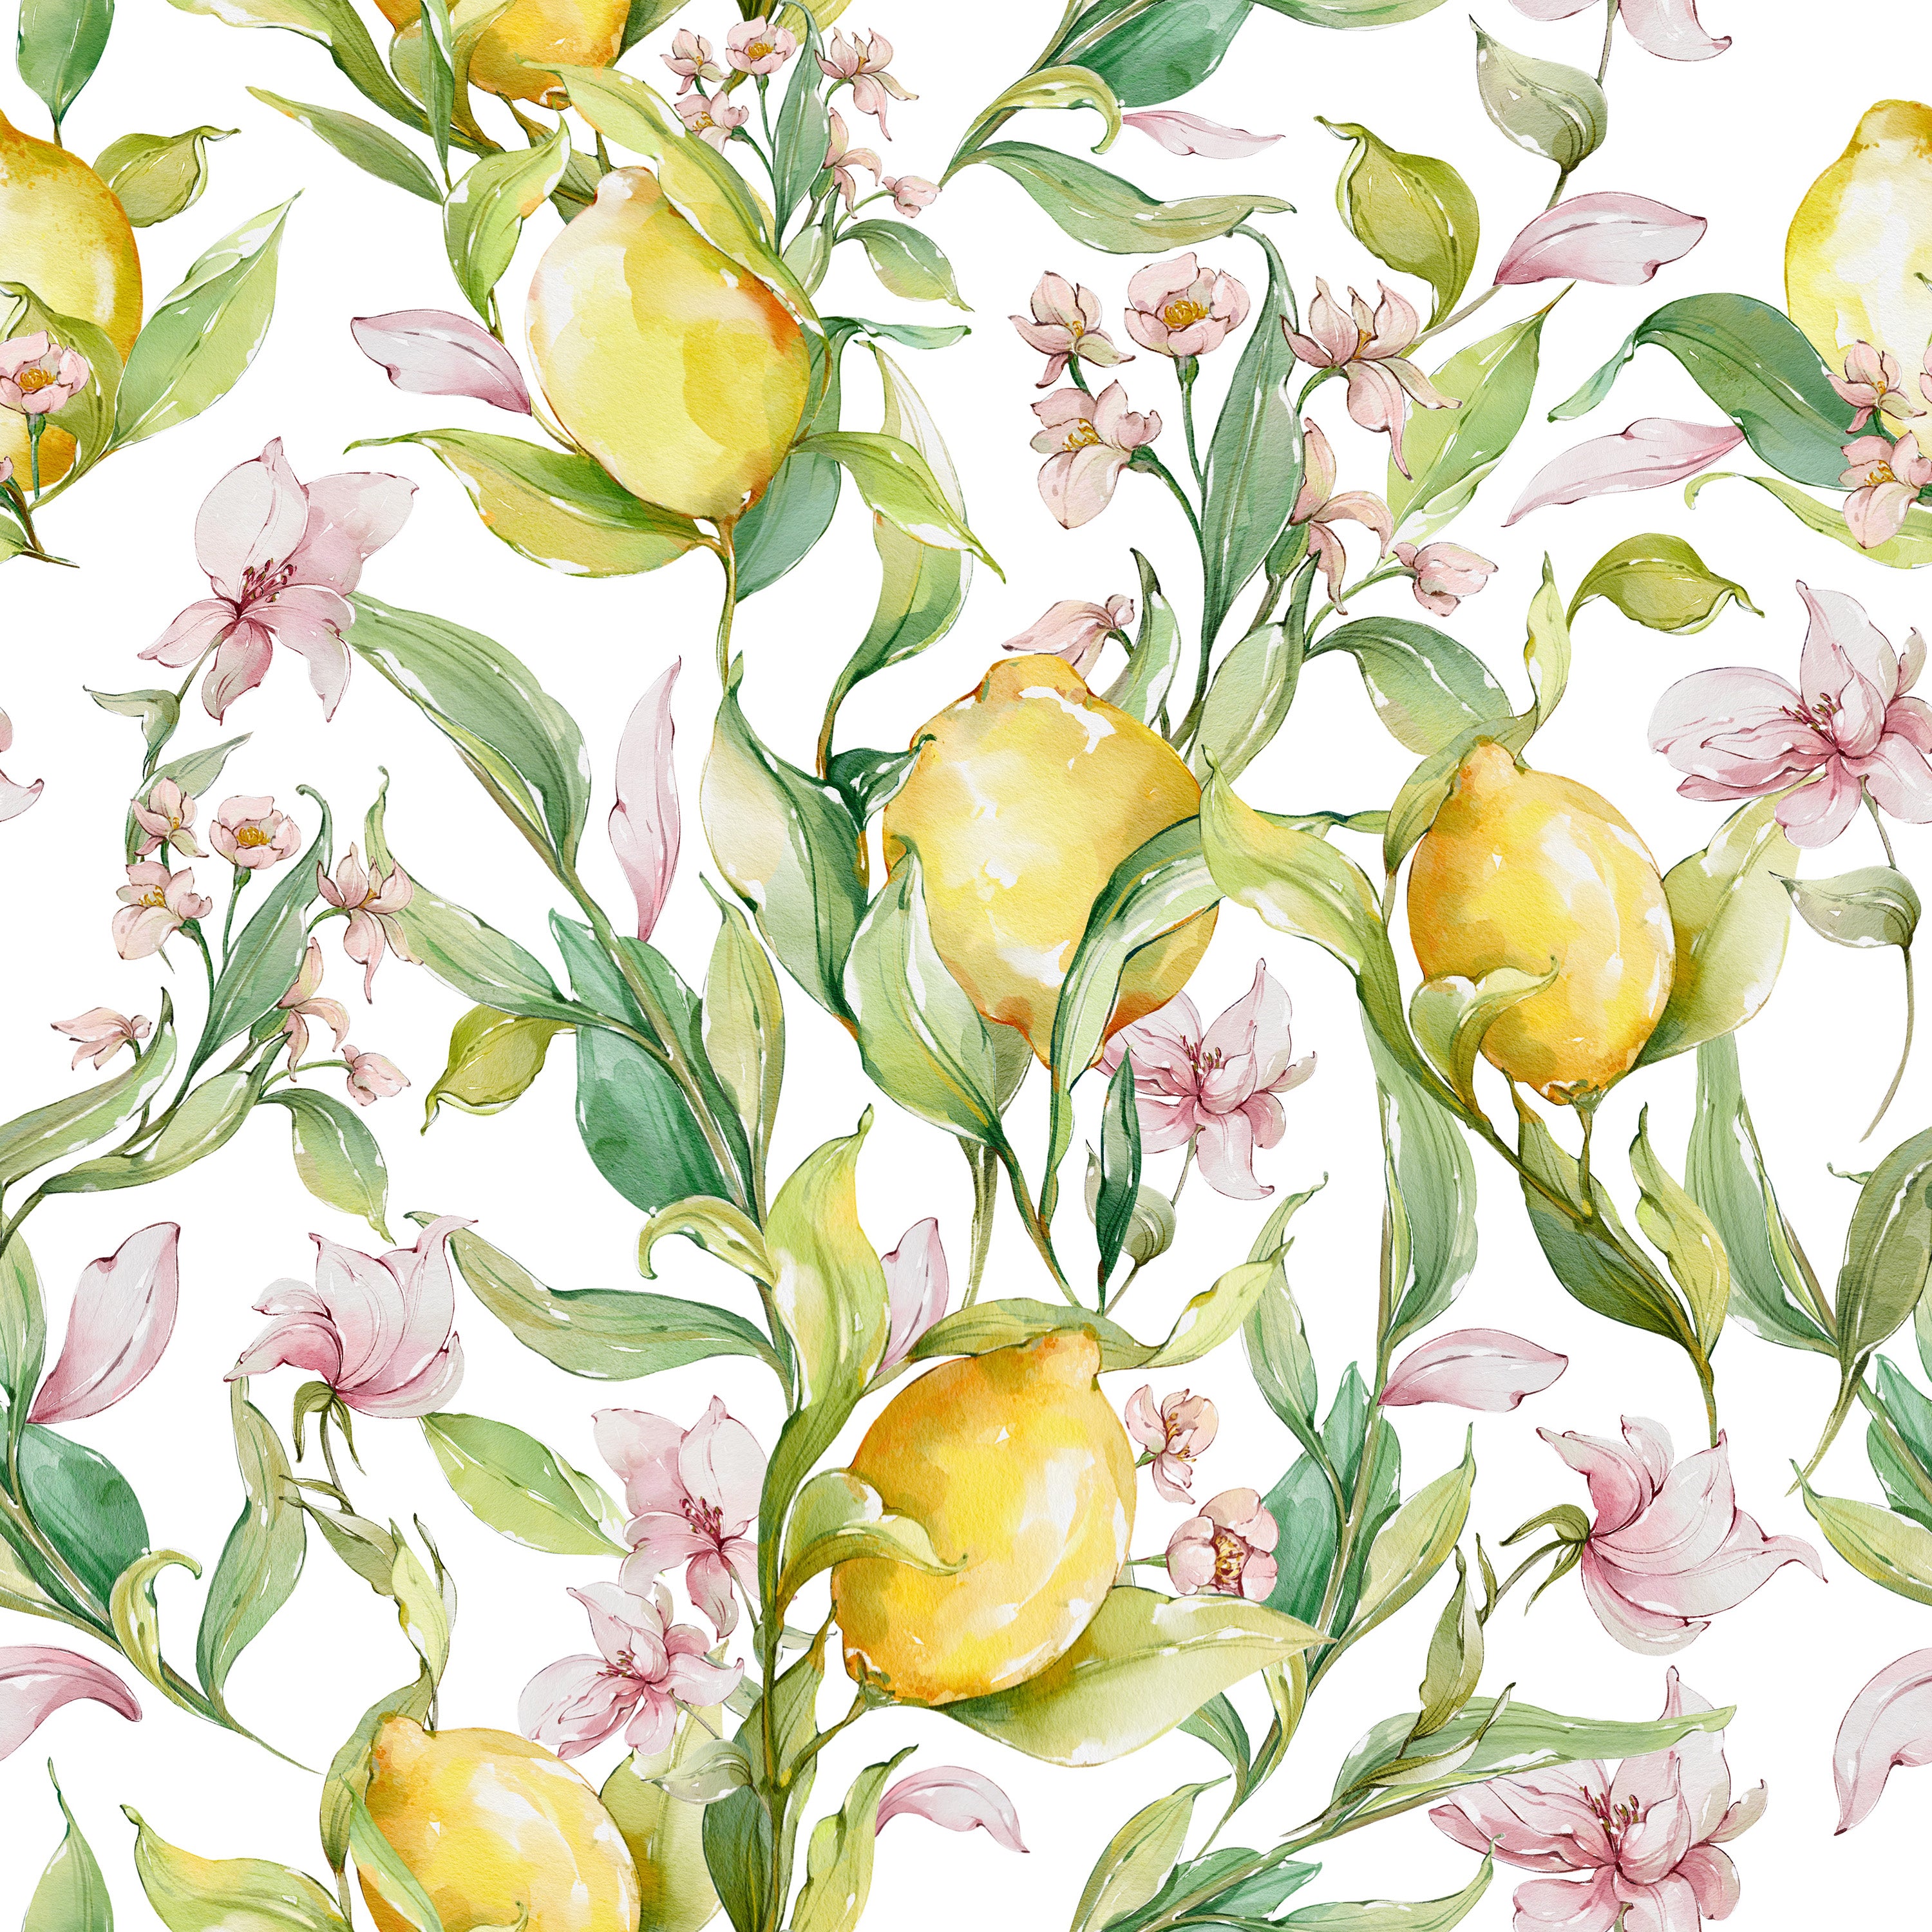 Close-up view of the Citrus Blossom Wallpaper showcasing a bright and colorful pattern of yellow lemons intertwined with delicate pink flowers and green leaves. This detailed shot highlights the watercolor texture and natural aesthetic of the wallpaper